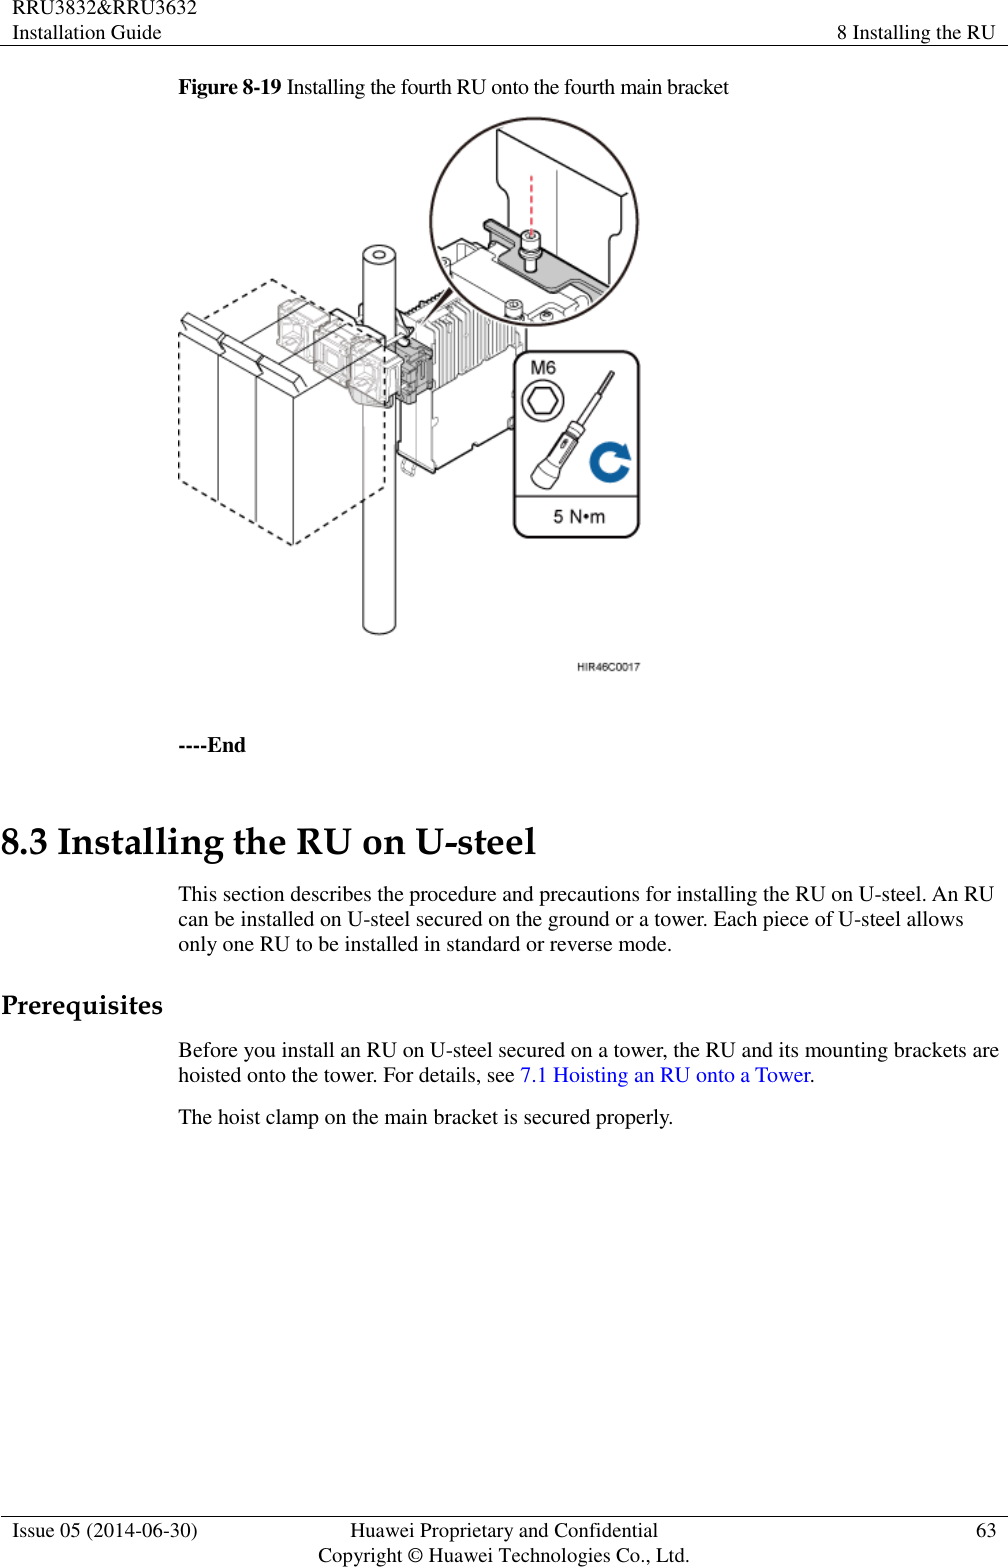 RRU3832&amp;RRU3632 Installation Guide 8 Installing the RU  Issue 05 (2014-06-30) Huawei Proprietary and Confidential                                     Copyright © Huawei Technologies Co., Ltd. 63  Figure 8-19 Installing the fourth RU onto the fourth main bracket   ----End 8.3 Installing the RU on U-steel This section describes the procedure and precautions for installing the RU on U-steel. An RU can be installed on U-steel secured on the ground or a tower. Each piece of U-steel allows only one RU to be installed in standard or reverse mode. Prerequisites Before you install an RU on U-steel secured on a tower, the RU and its mounting brackets are hoisted onto the tower. For details, see 7.1 Hoisting an RU onto a Tower. The hoist clamp on the main bracket is secured properly.  